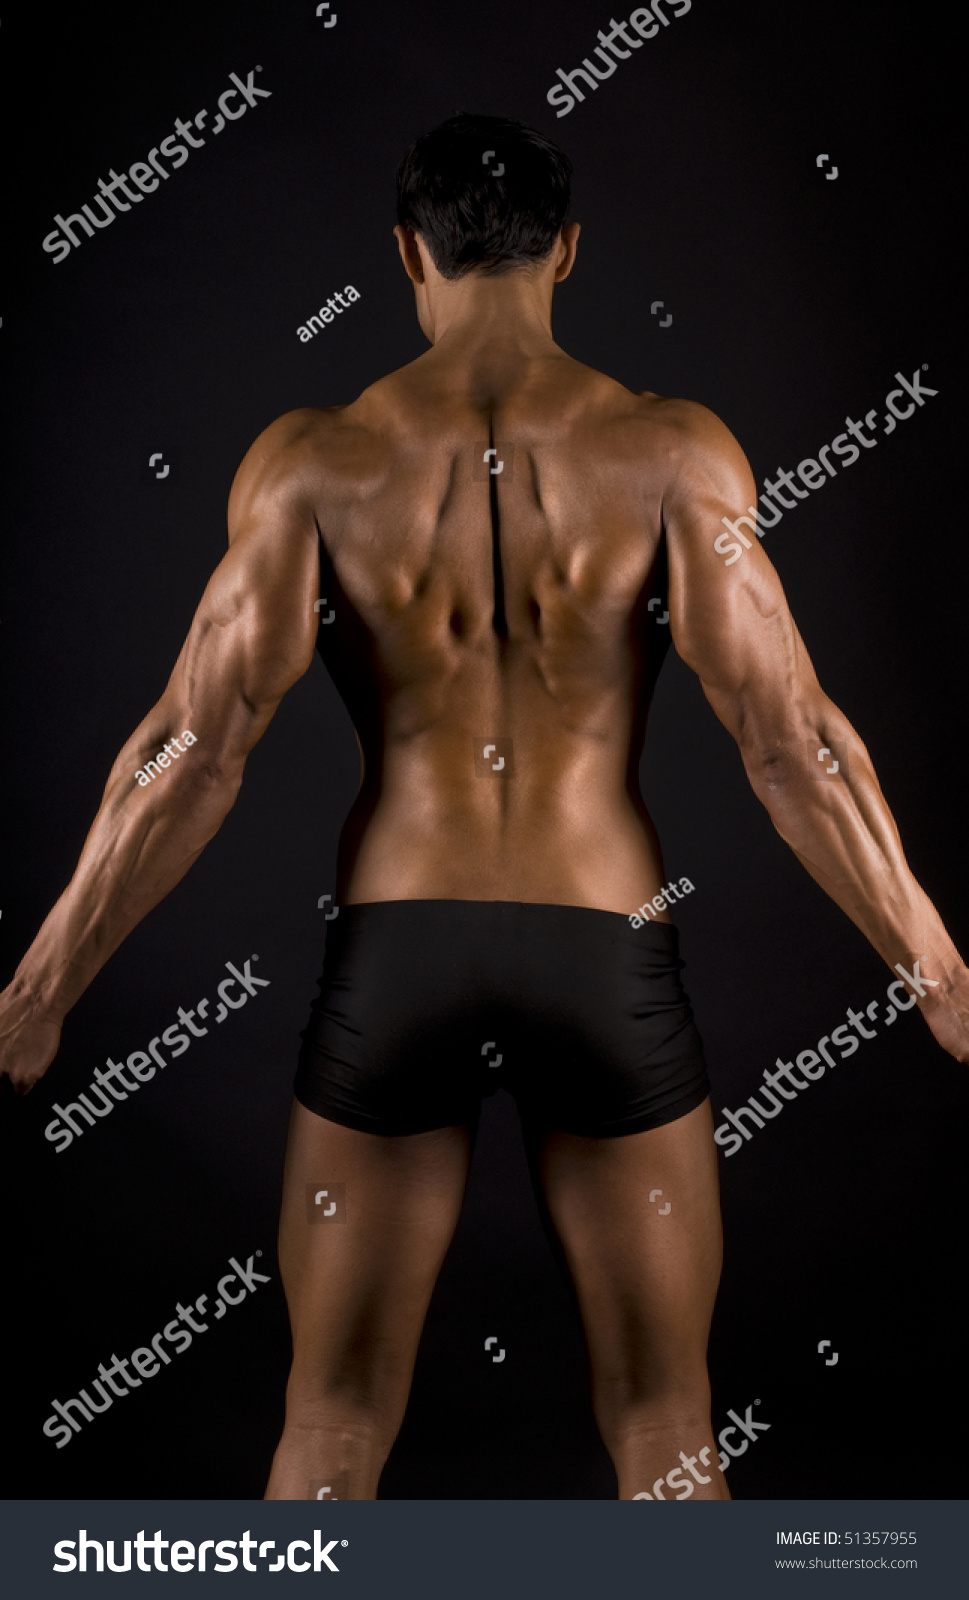 male muscular back on black background. #51357955